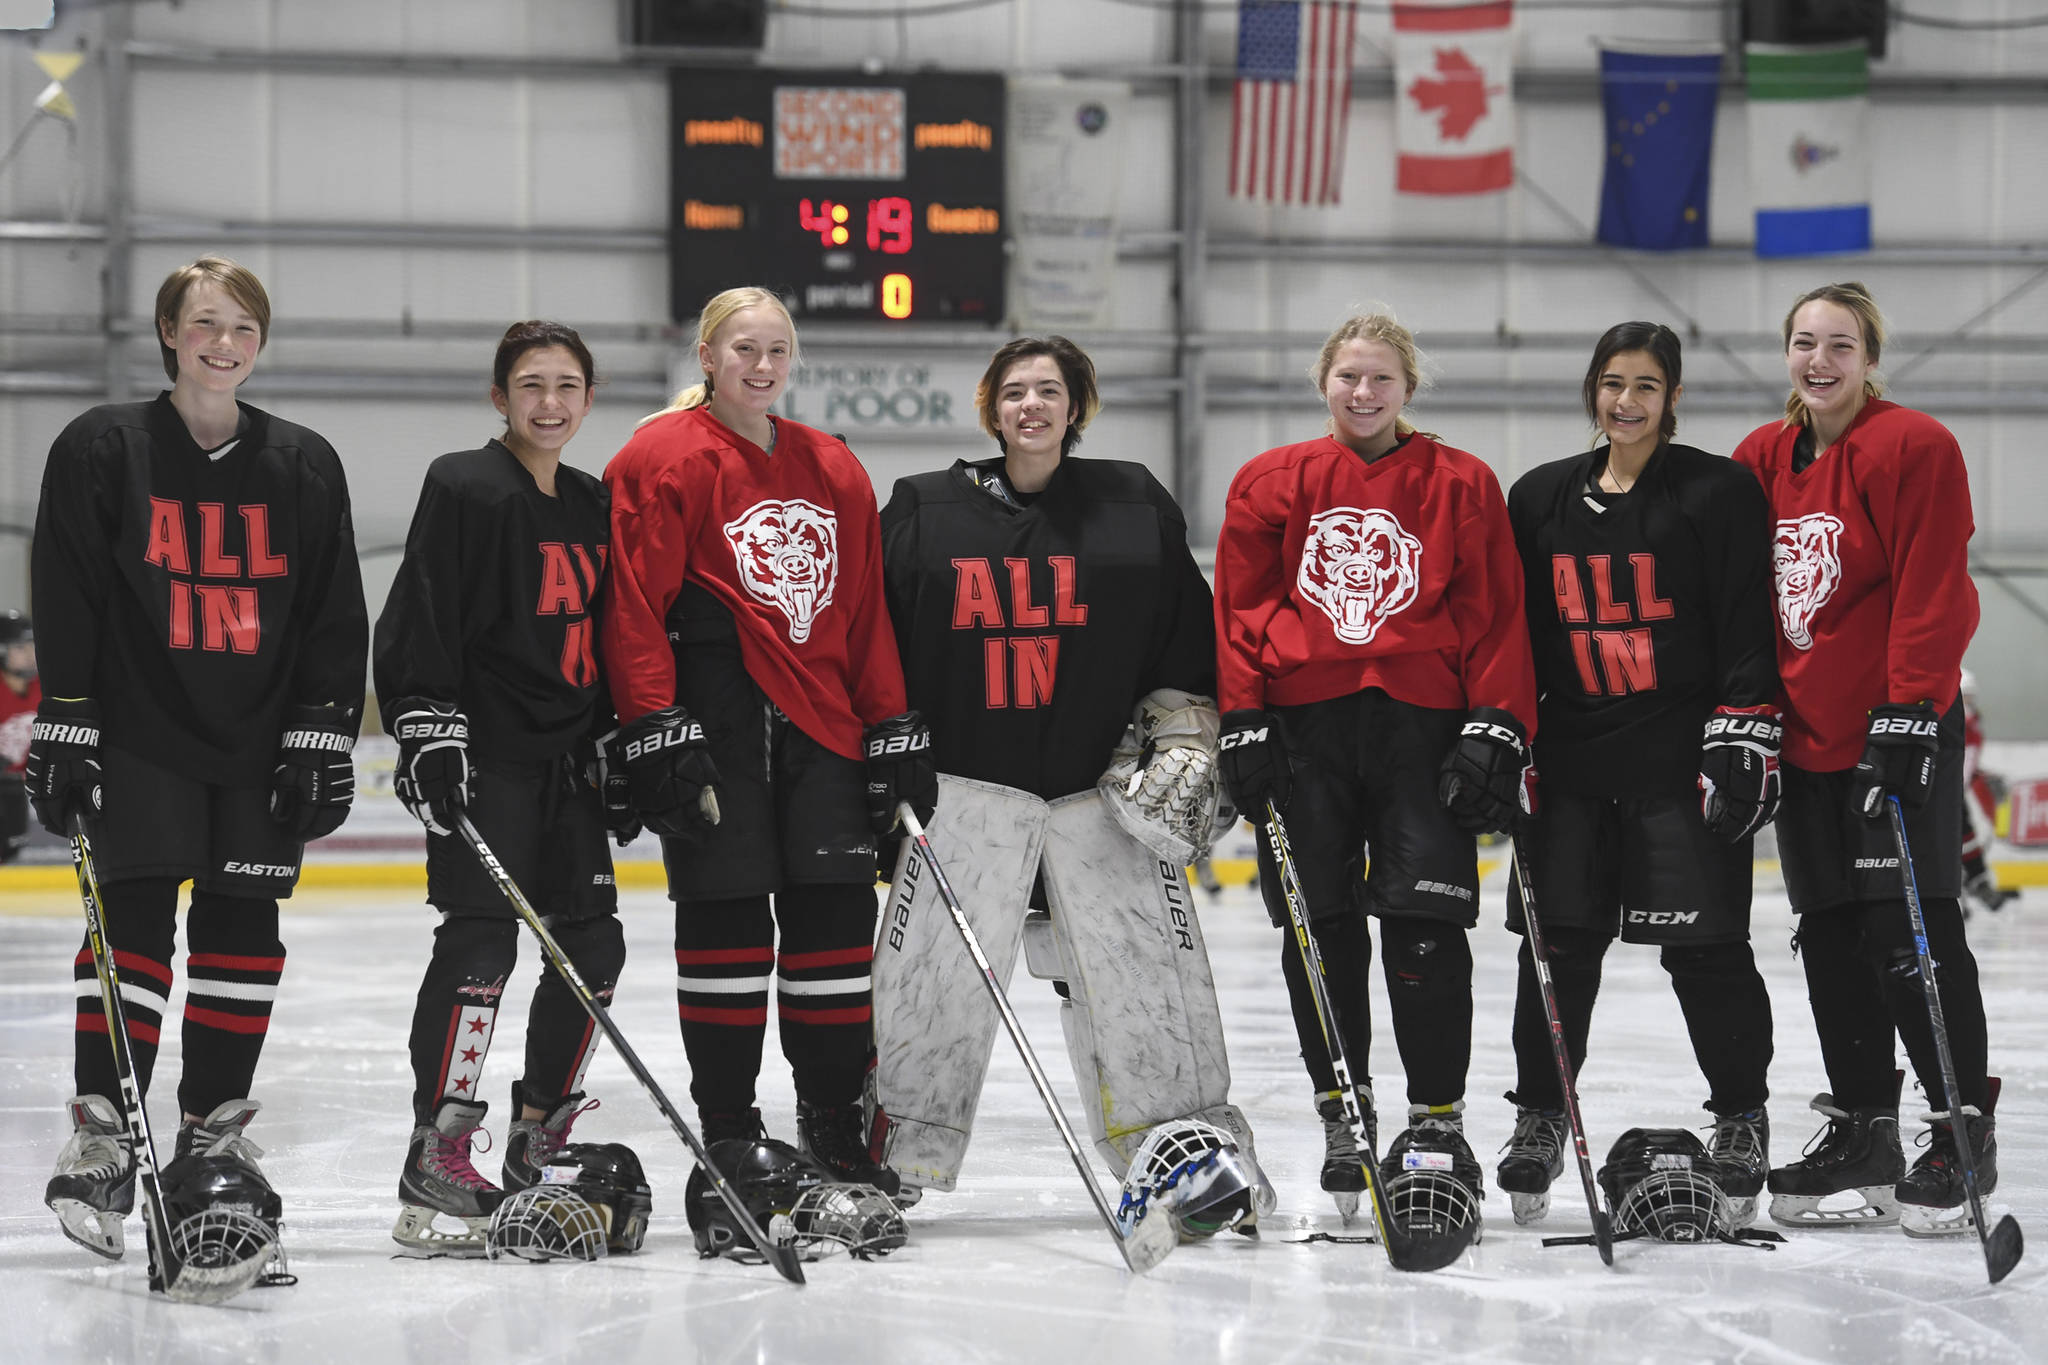 Seven girls are on the Juneau-Douglas High School: Yadaat.at Kalé hockey program this season and were photographed at Treadwell Arena on Thursday, Oct. 31, 2019. From left: Minta Schwartz, Bailey Hansen, Anna Dale, Lydia Ploof, Taylor Bentley, Nikki Lahnum and Kyla Bentz. (Michael Penn | Juneau Empire)